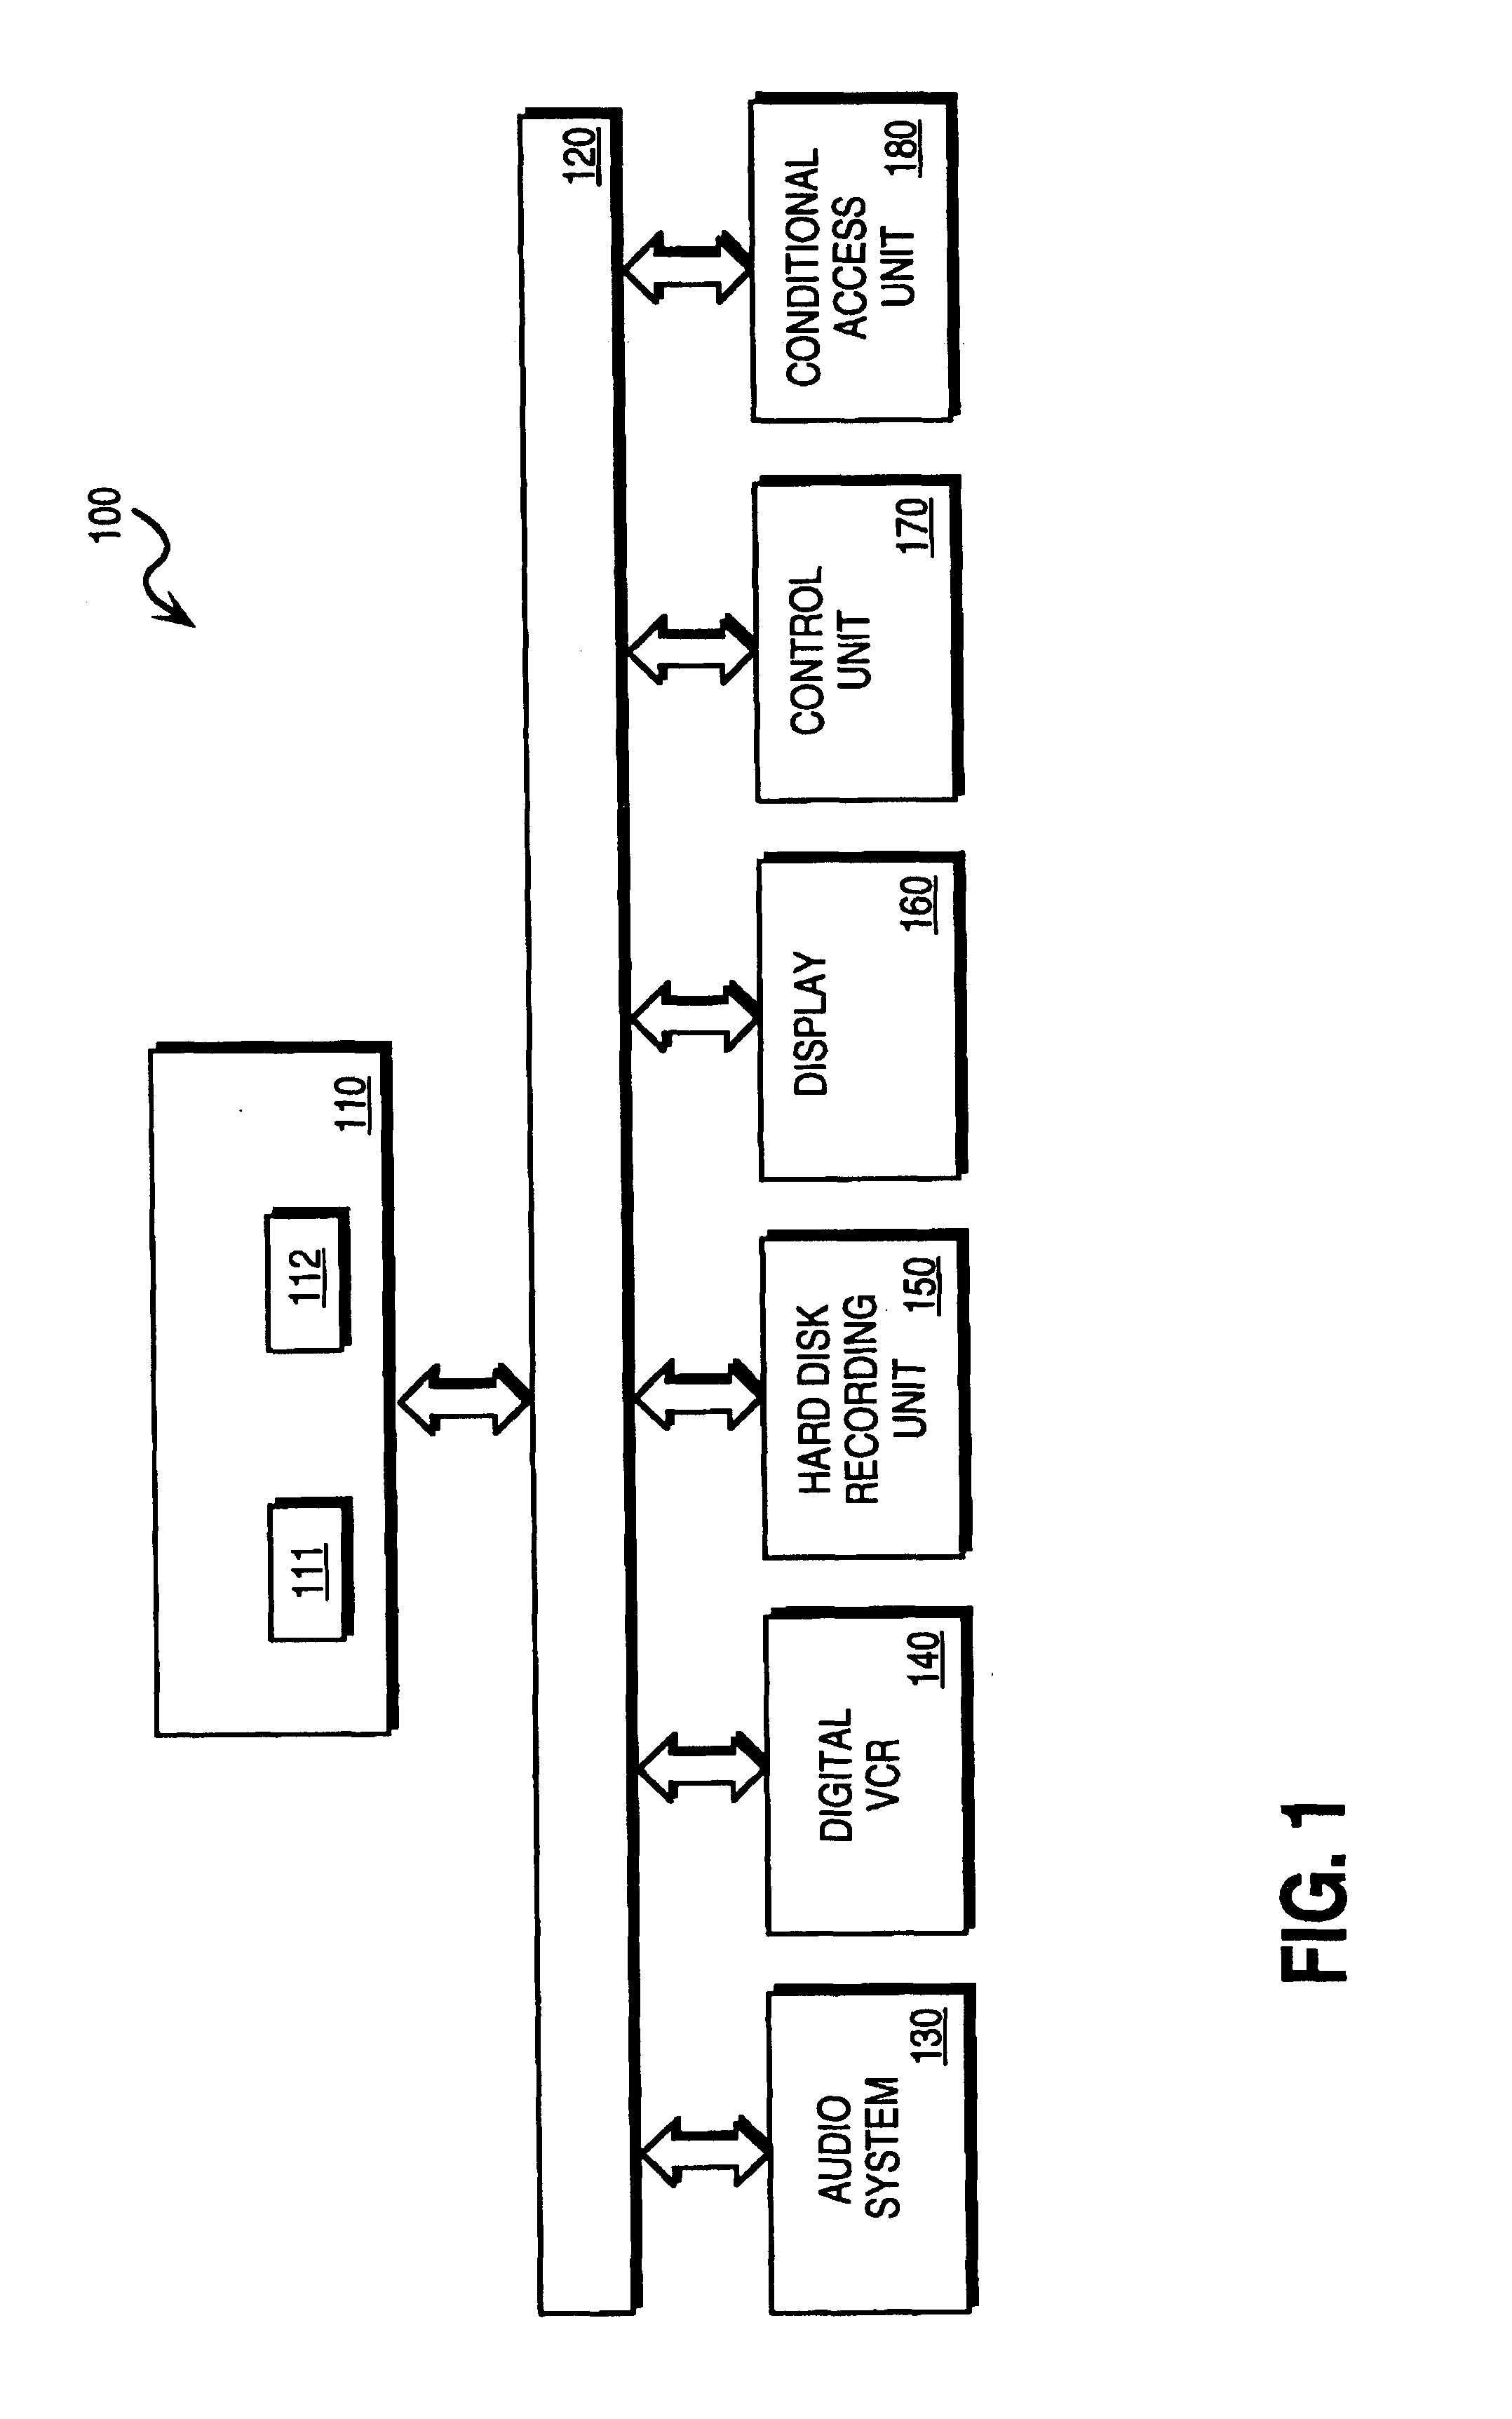 Method for simulcrypting scrambled data to a plurality of conditional access devices